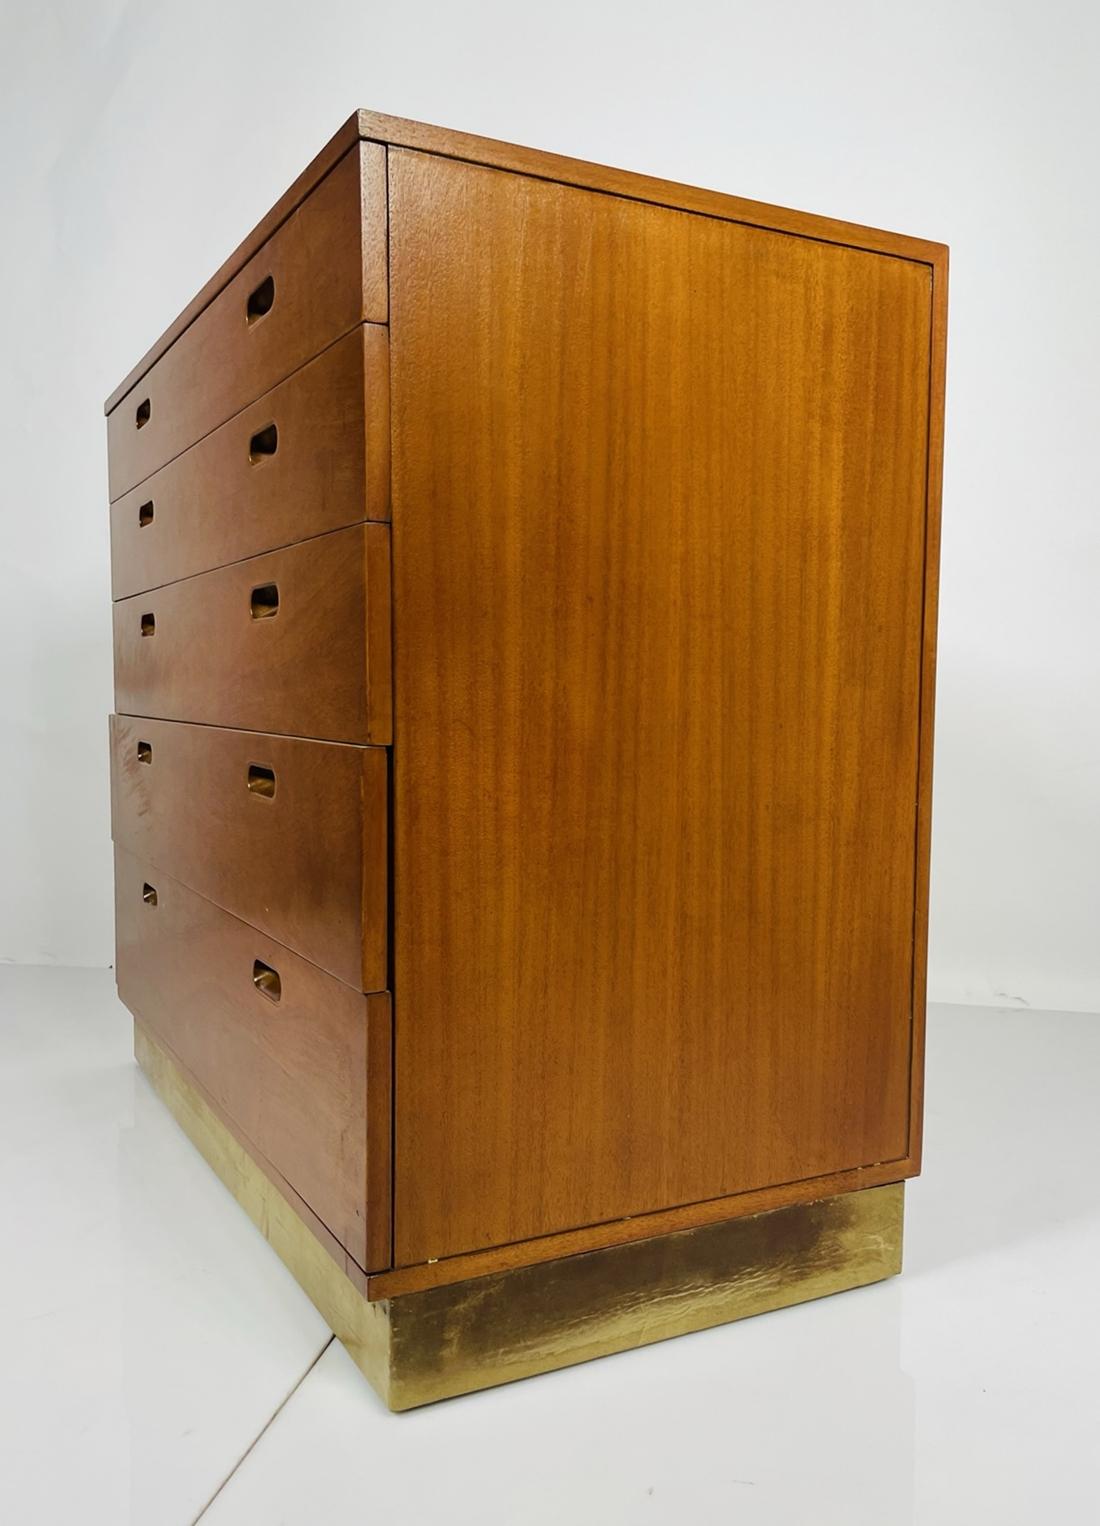 Beautiful chest of drawers designed by Edward Wormley for Dunbar.
The cabinet 5 drawers, the top drawer comes with separations for different garments.

The piece is in good vintage condition and it retains the original Dunbar tag.

Measurements:
36